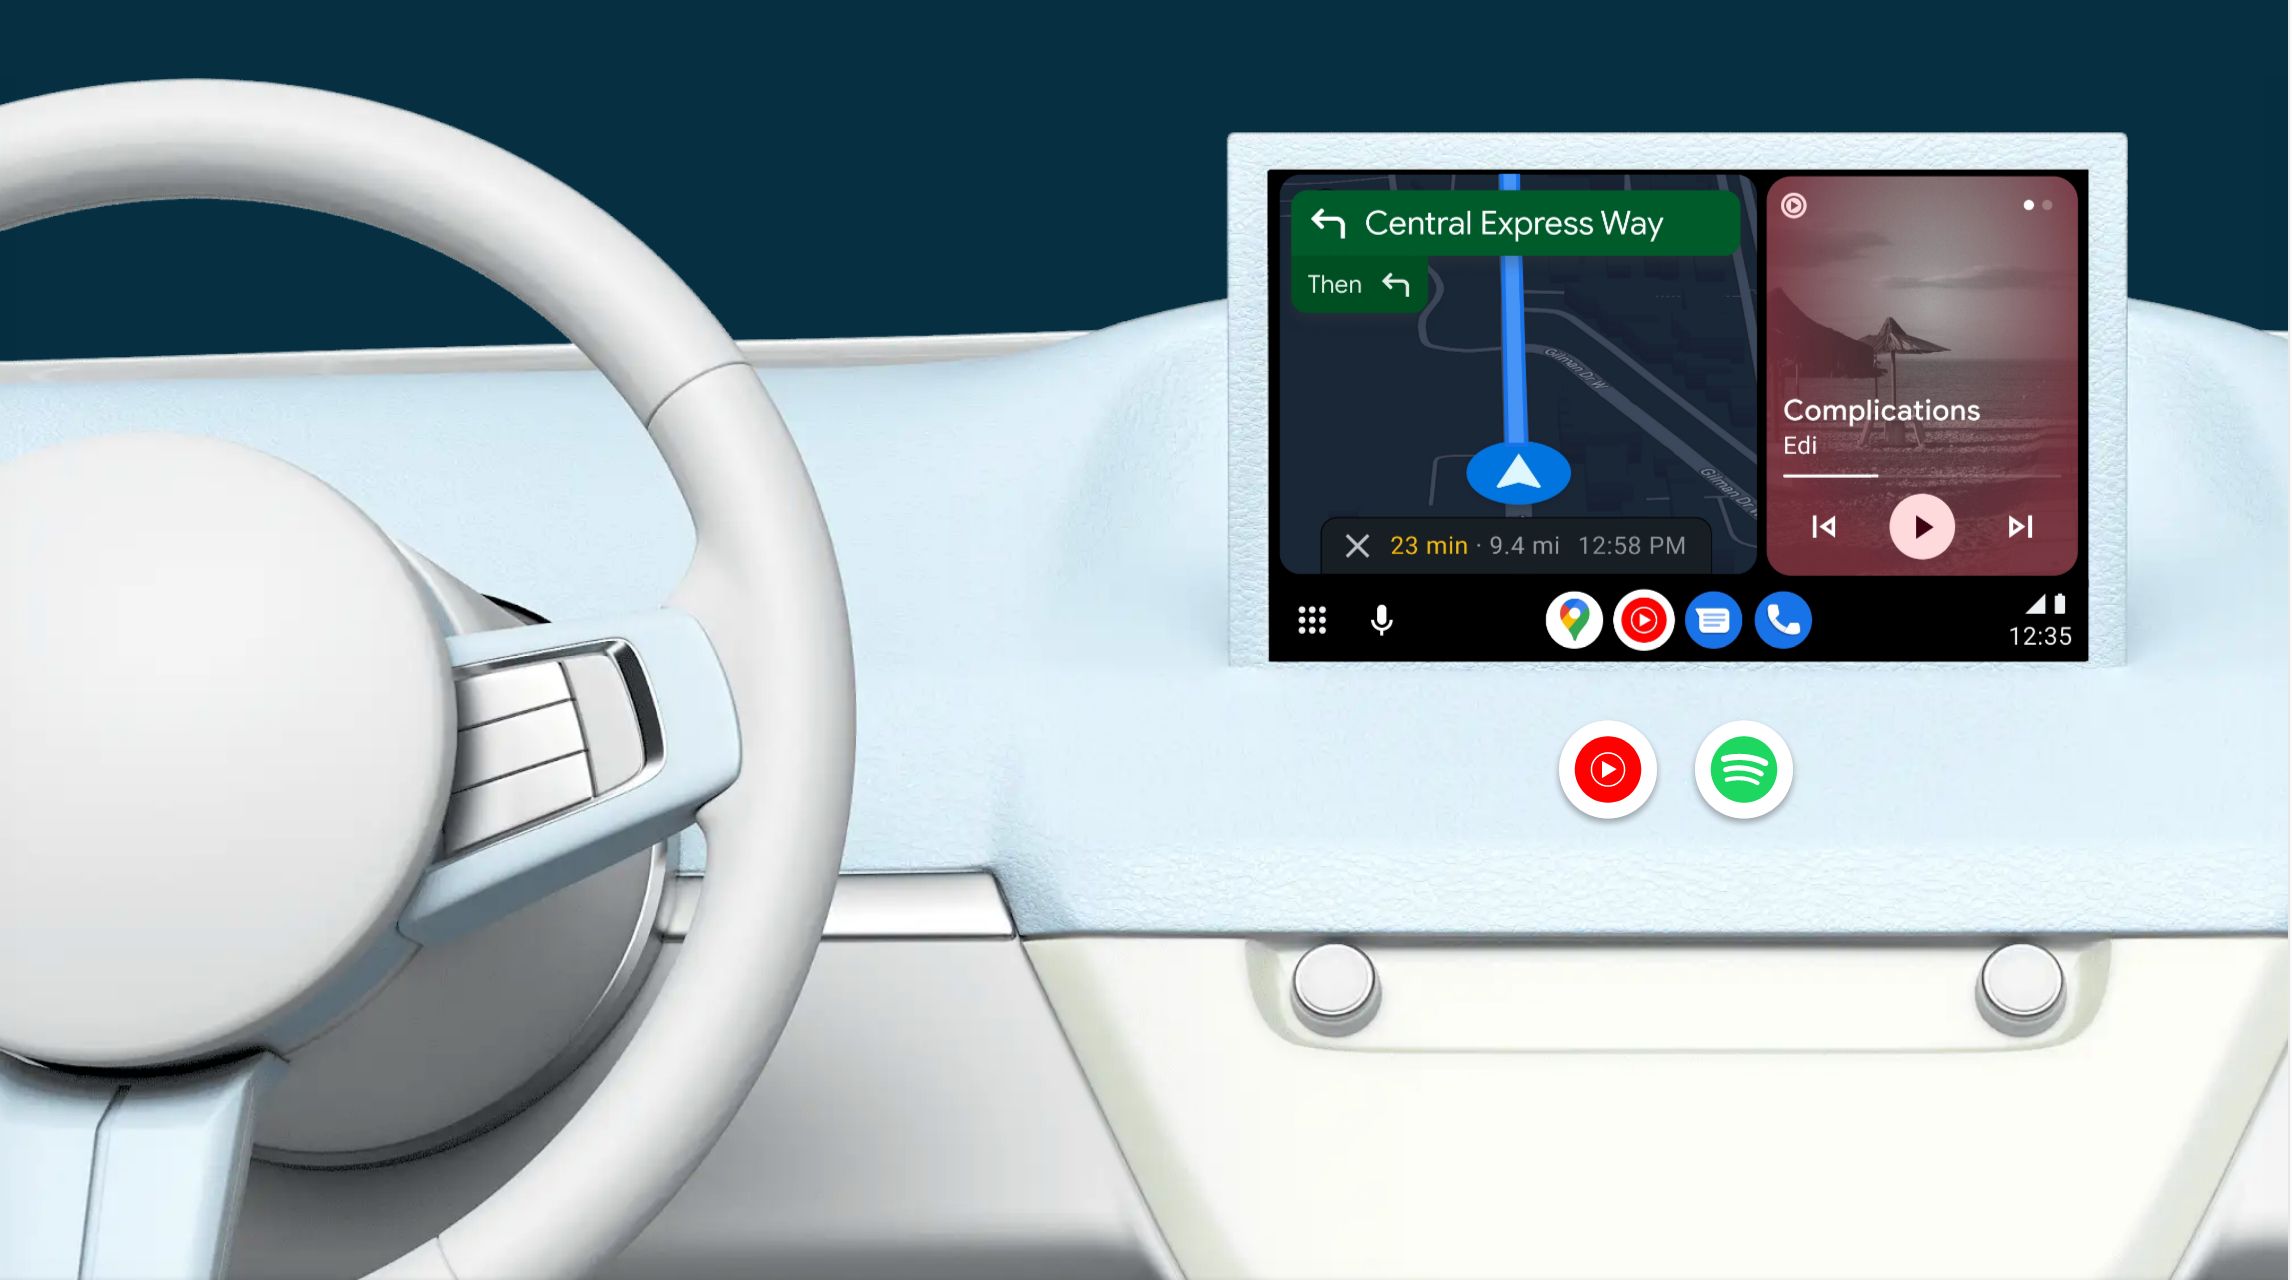 You can now use Android Auto without a USB cable